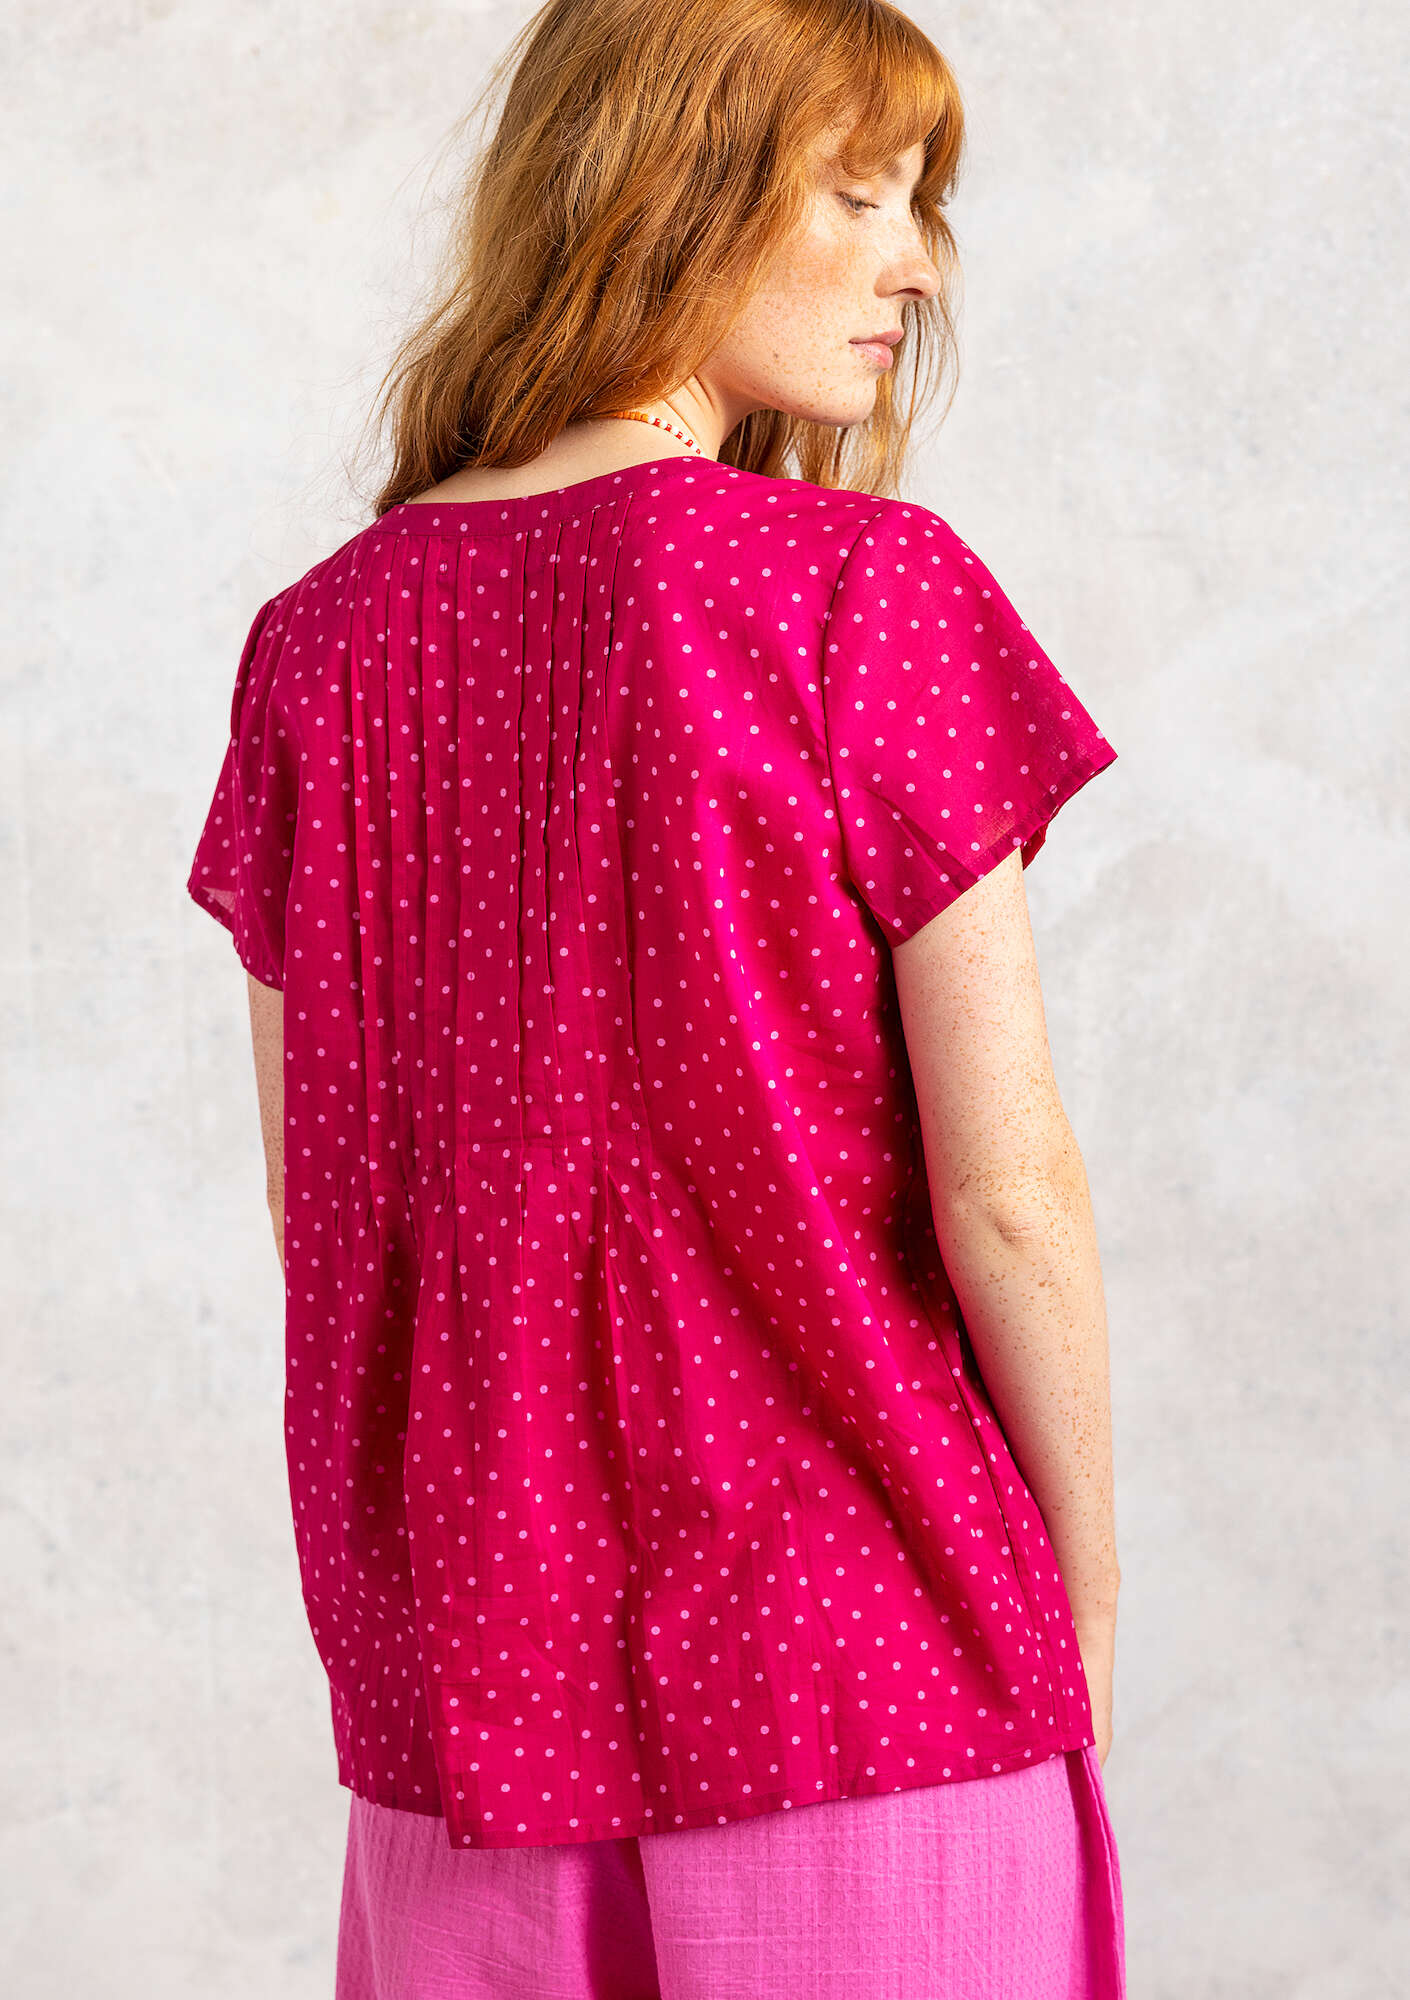 Short-sleeve “Pytte” blouse in organic cotton cyclamen/patterned